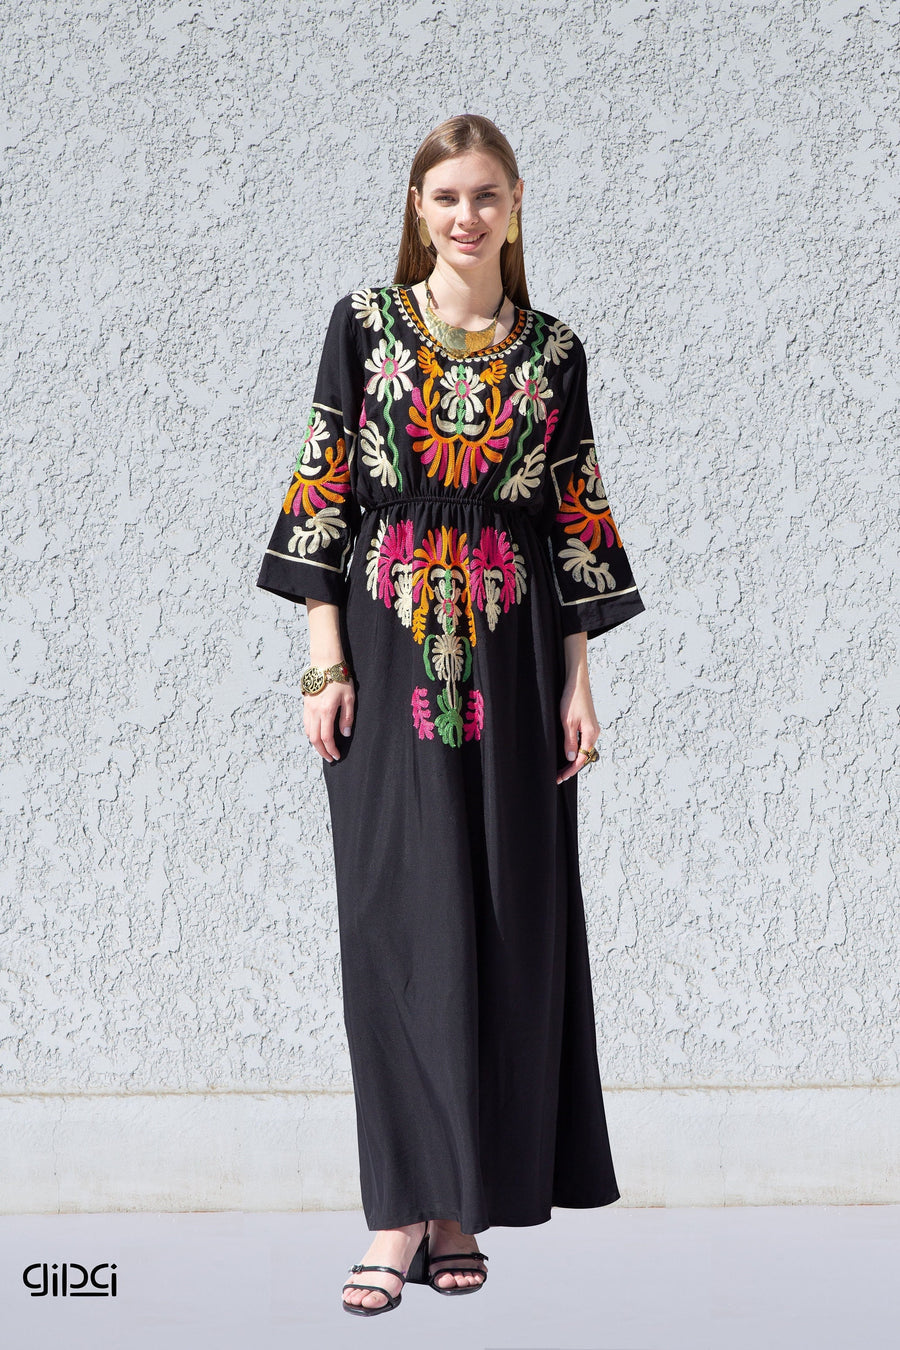 Black colorful embroidered cotton Caftan, caftan Kaftan maxi dress, embroidered Caftan dress, Caftan maxi dress, Caftans for women, Caftans